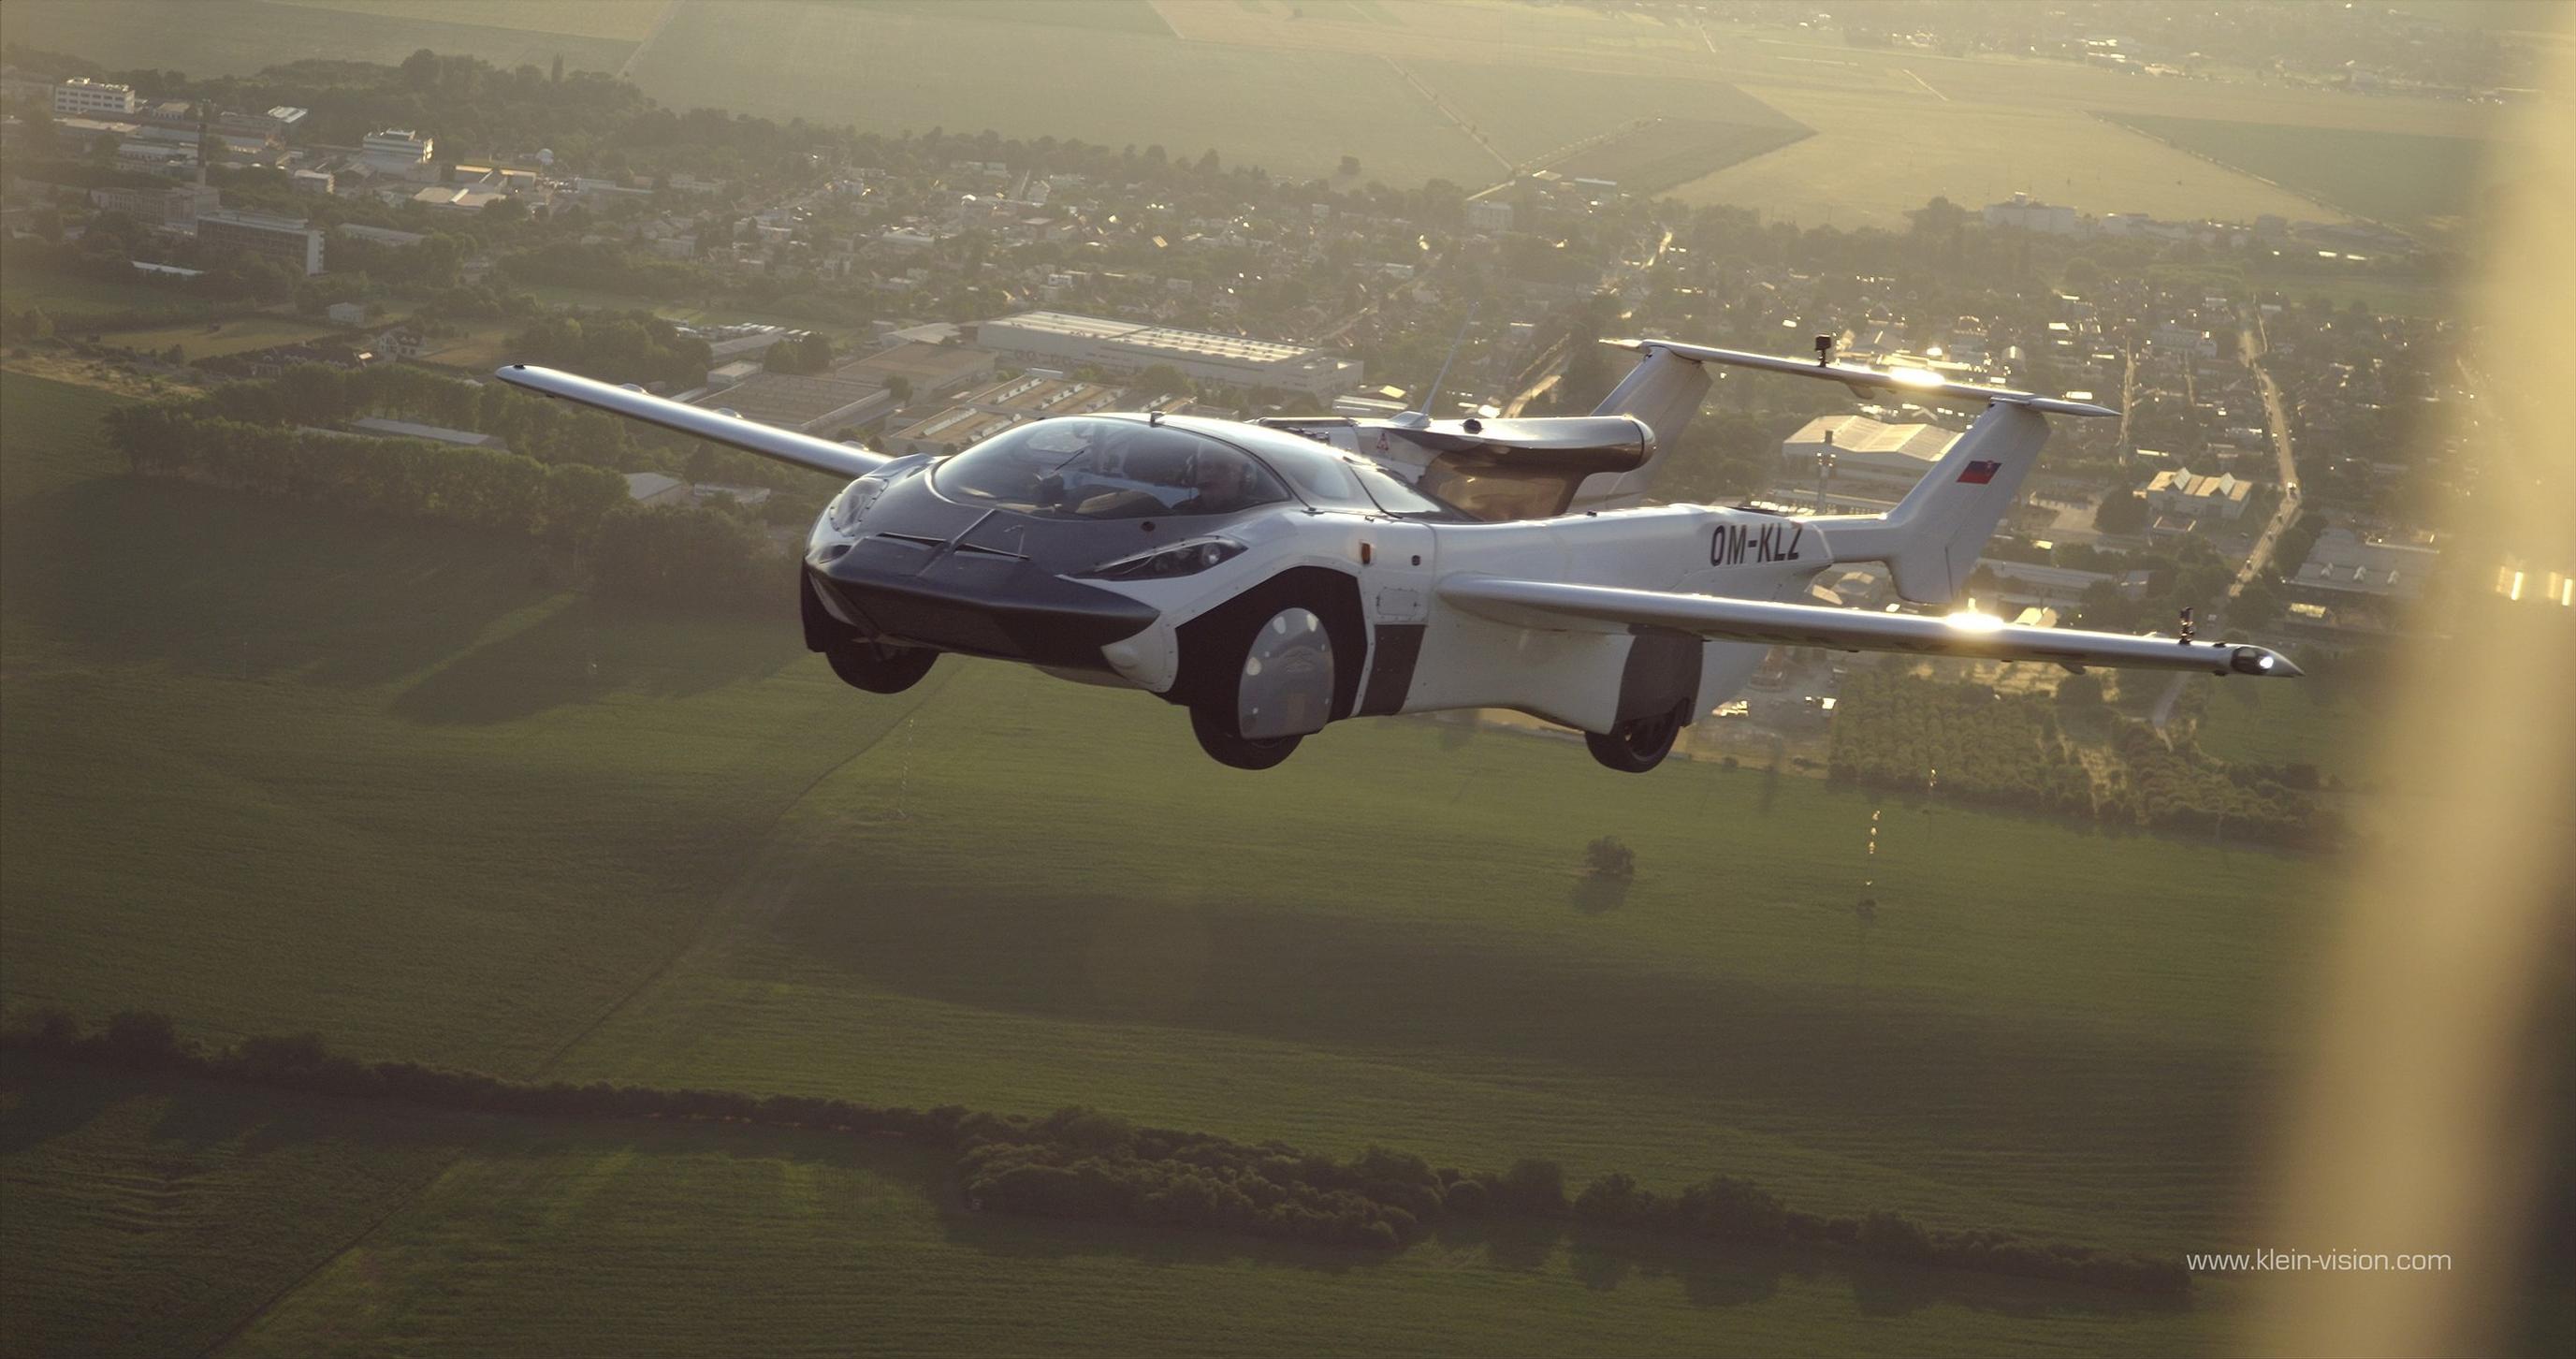 The Klein Vision Aircar is one of several flying car concepts under development